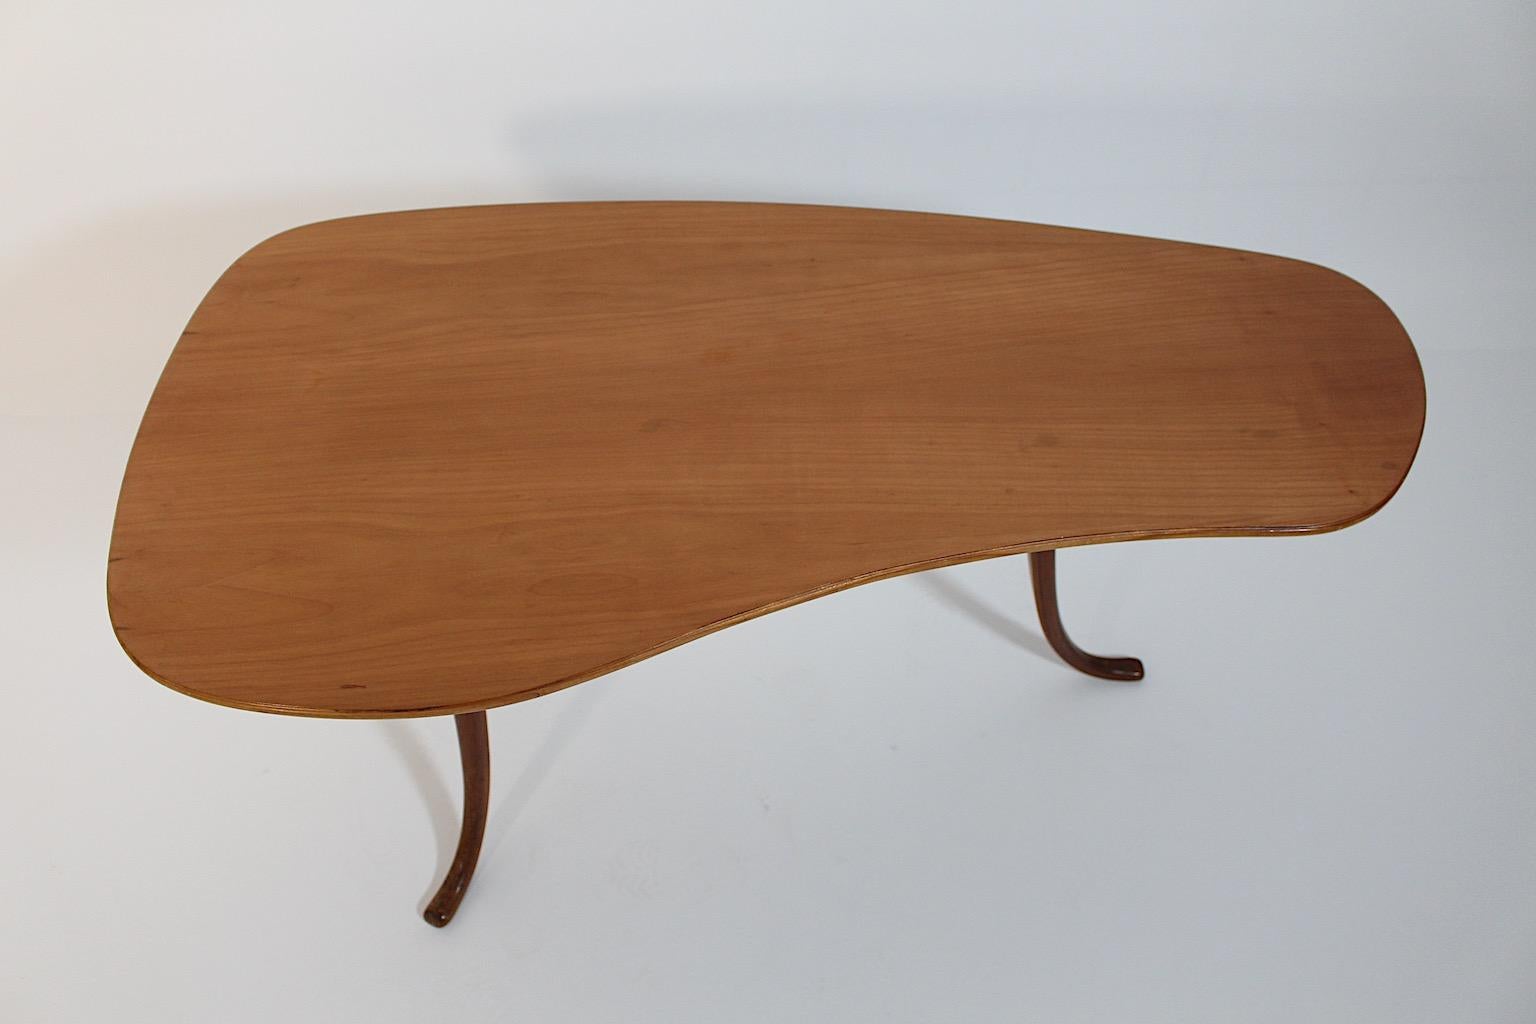 Modernist Cherry Brass Side Table Coffee Table Josef Frank, 1950s, Sweden For Sale 2